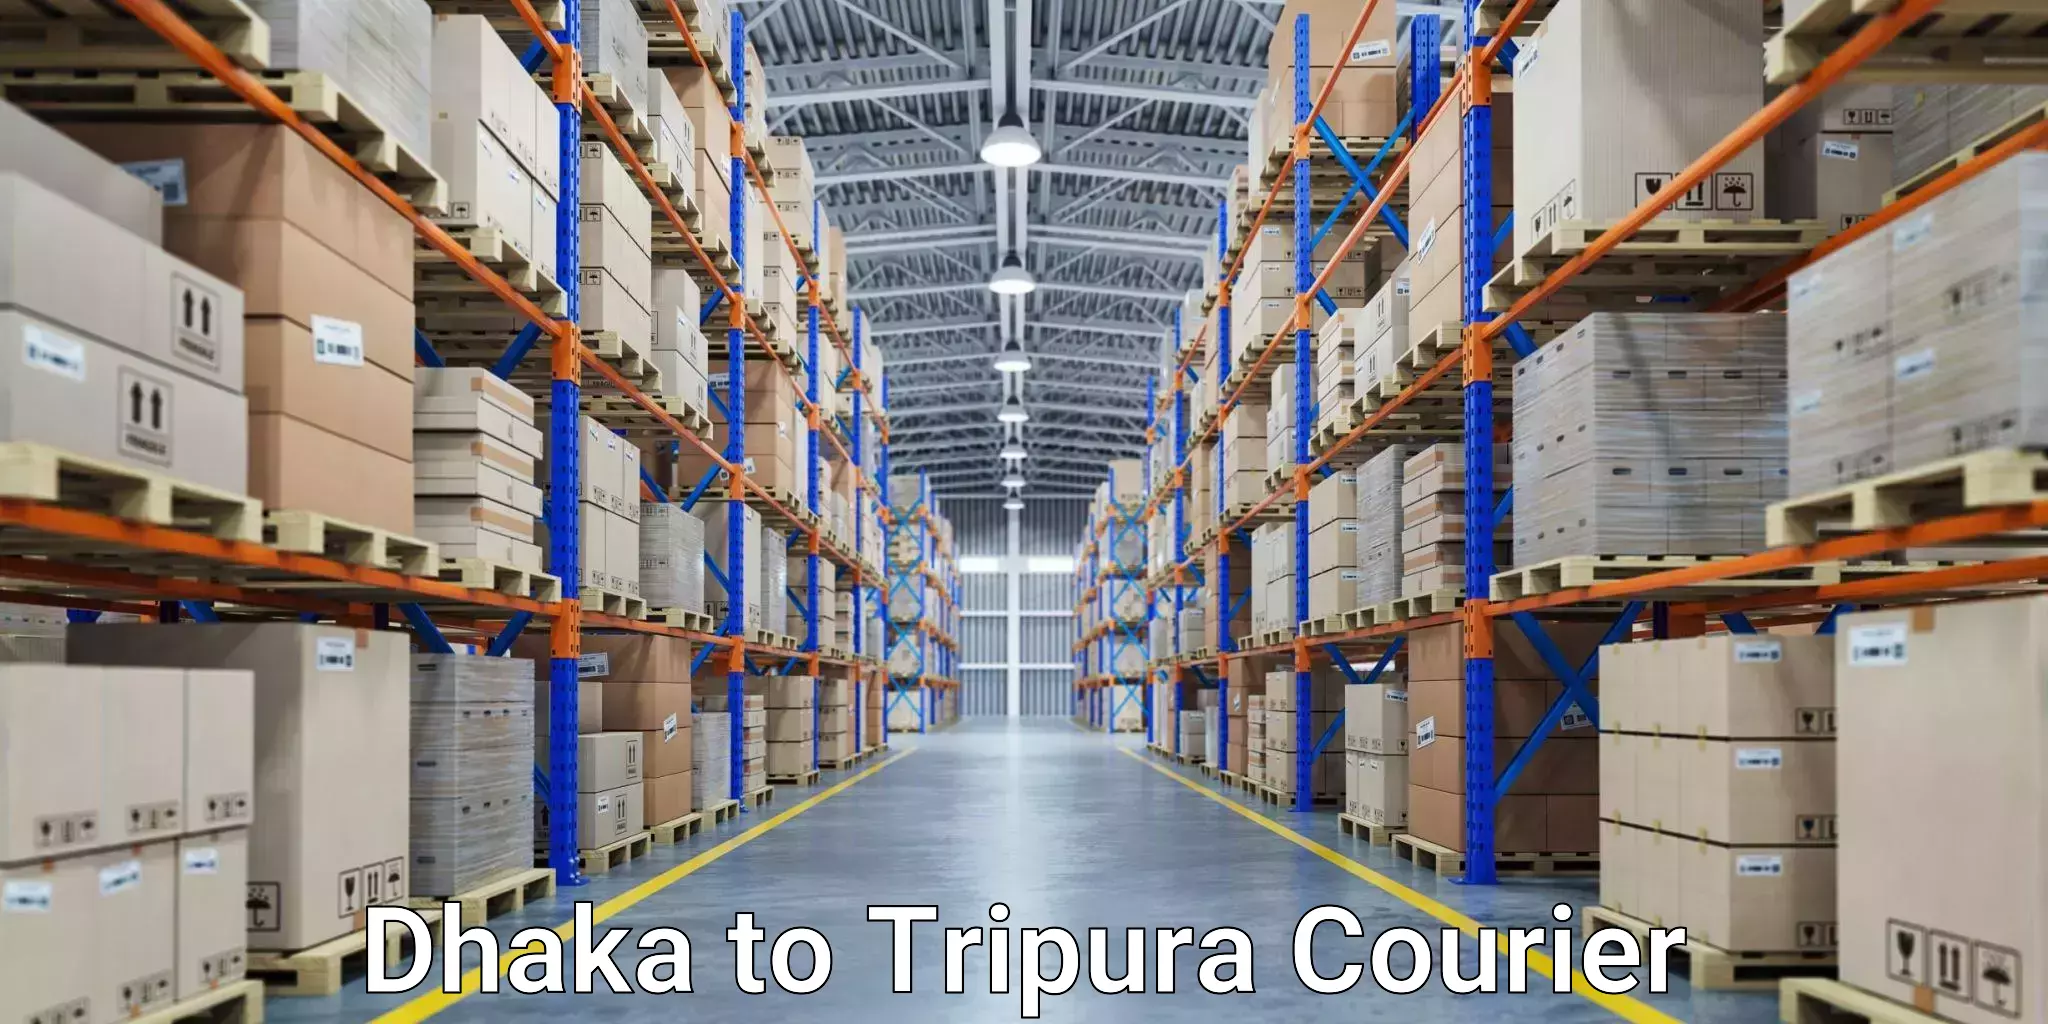 User-friendly delivery service Dhaka to Tripura